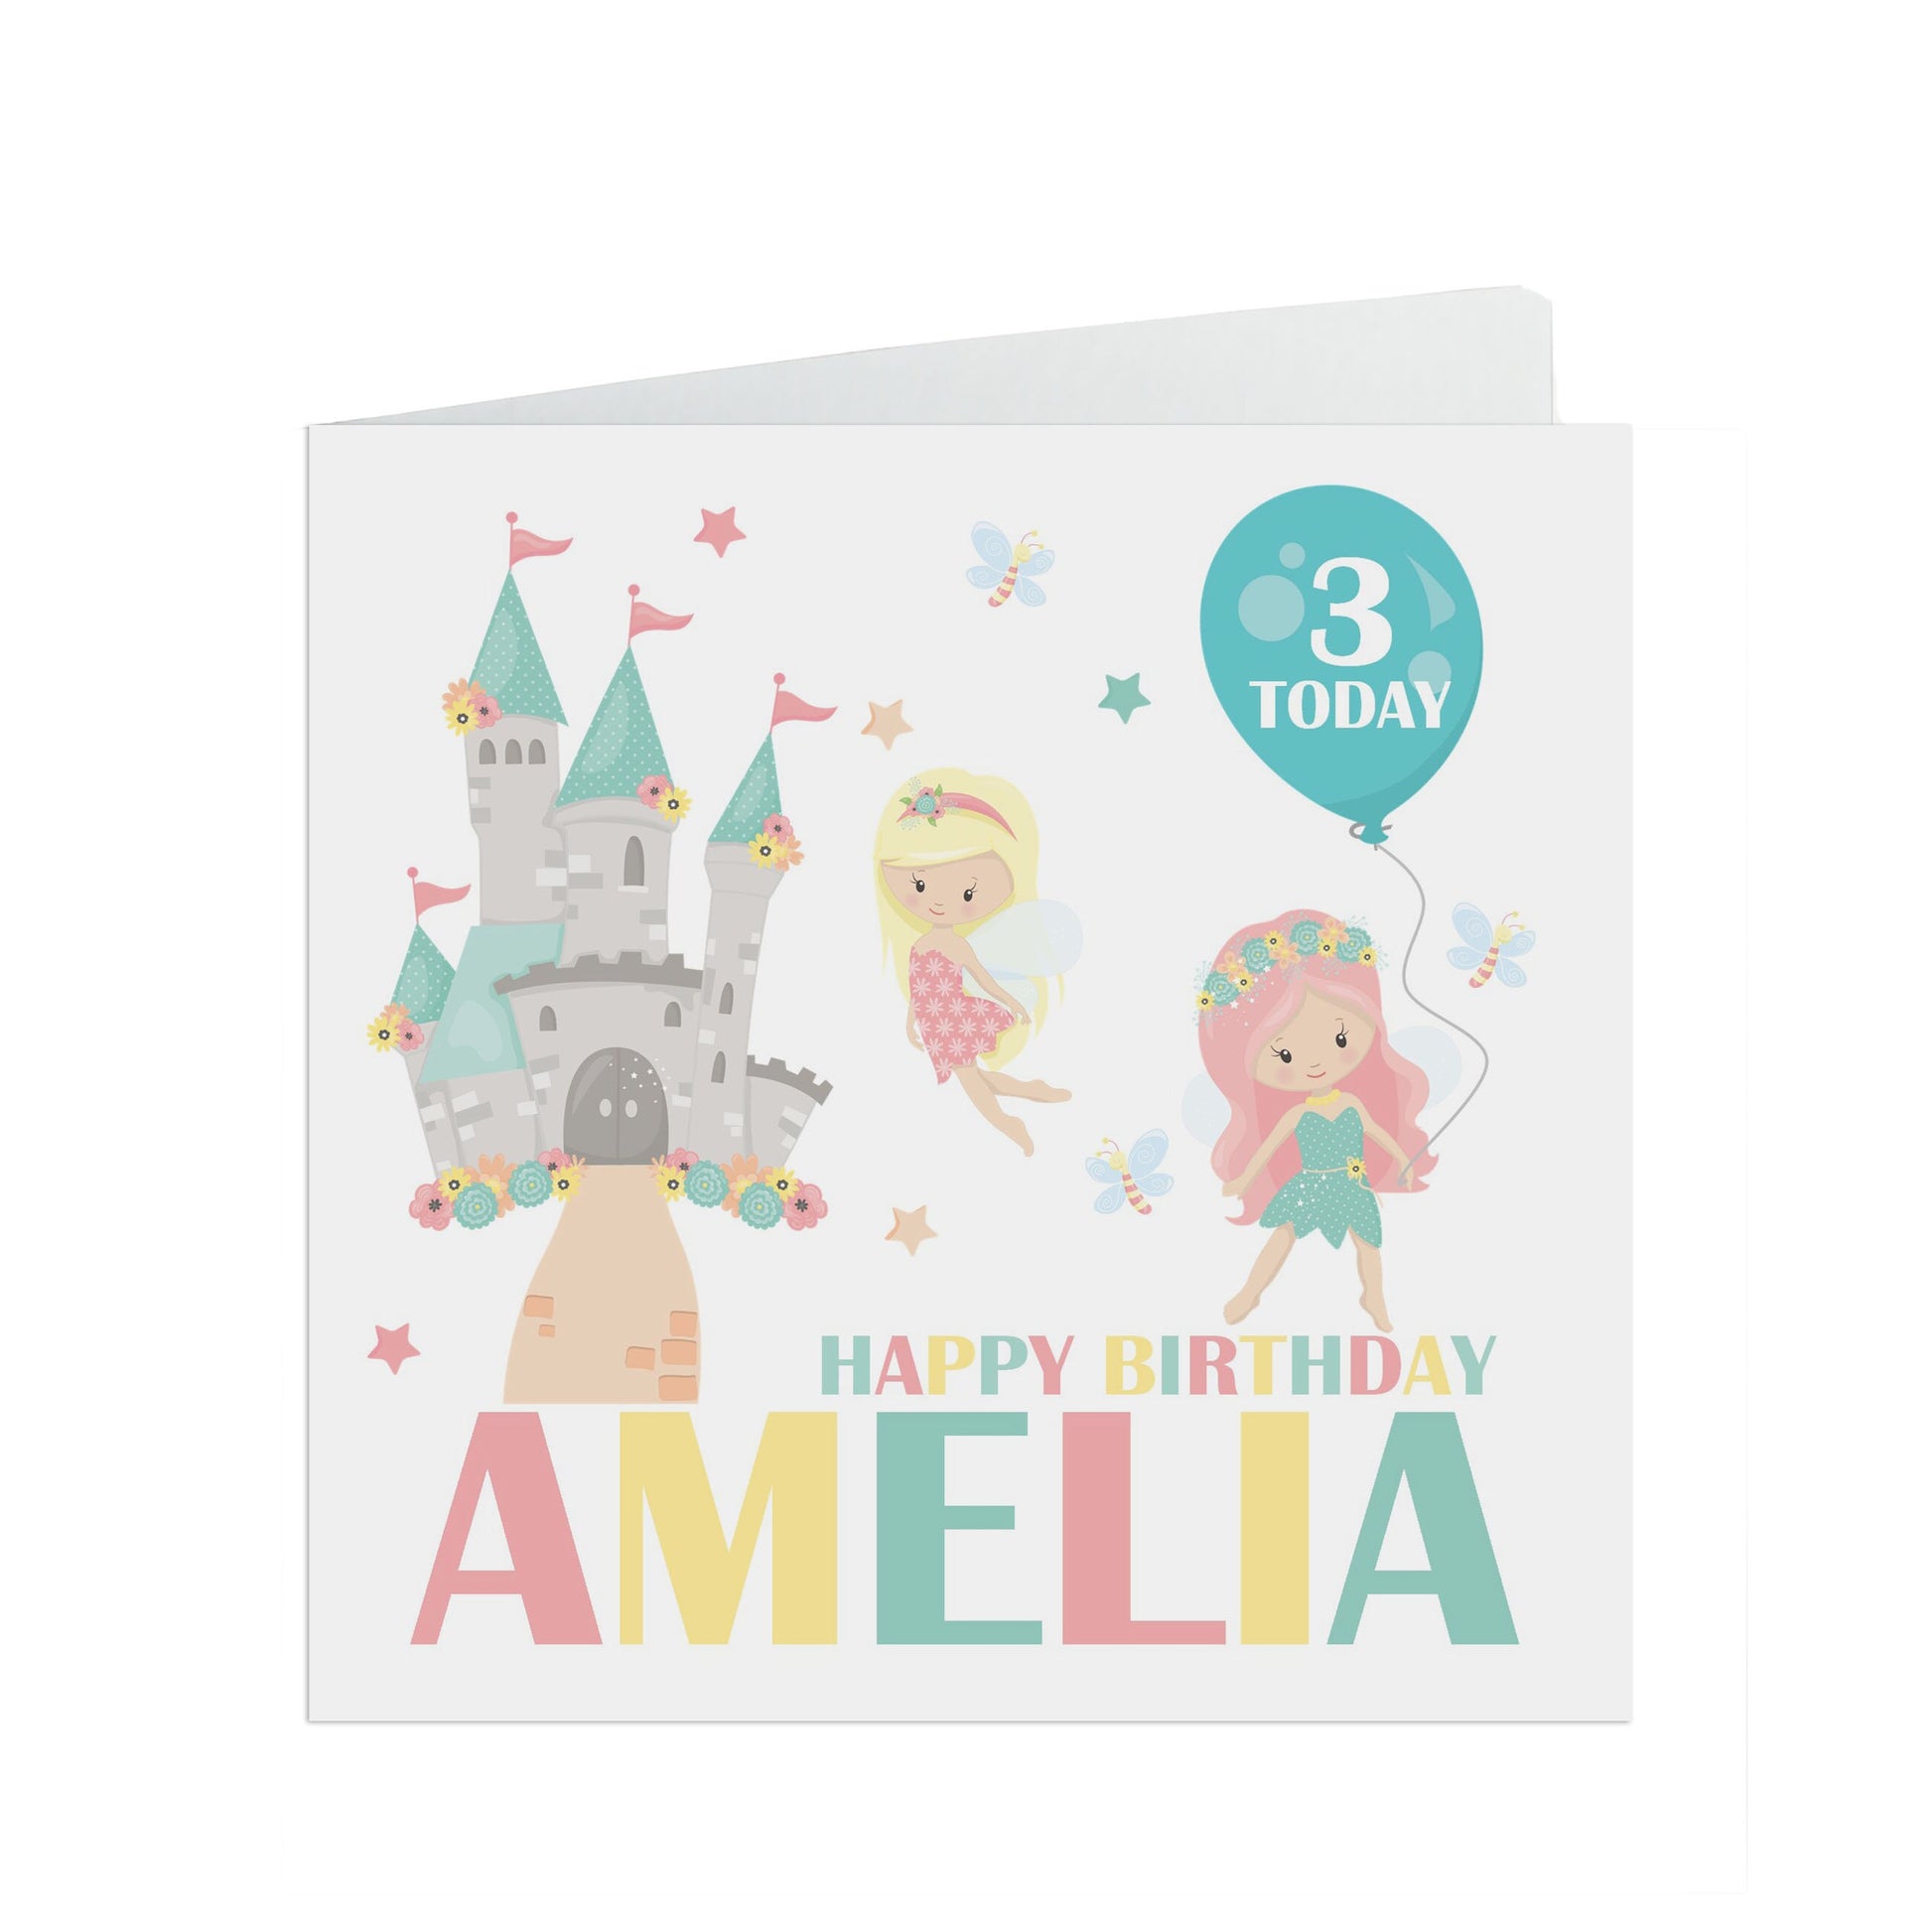 Personalised Fairy Birthday Card With Name And Age For Daughter, Niece Or Granddaughter